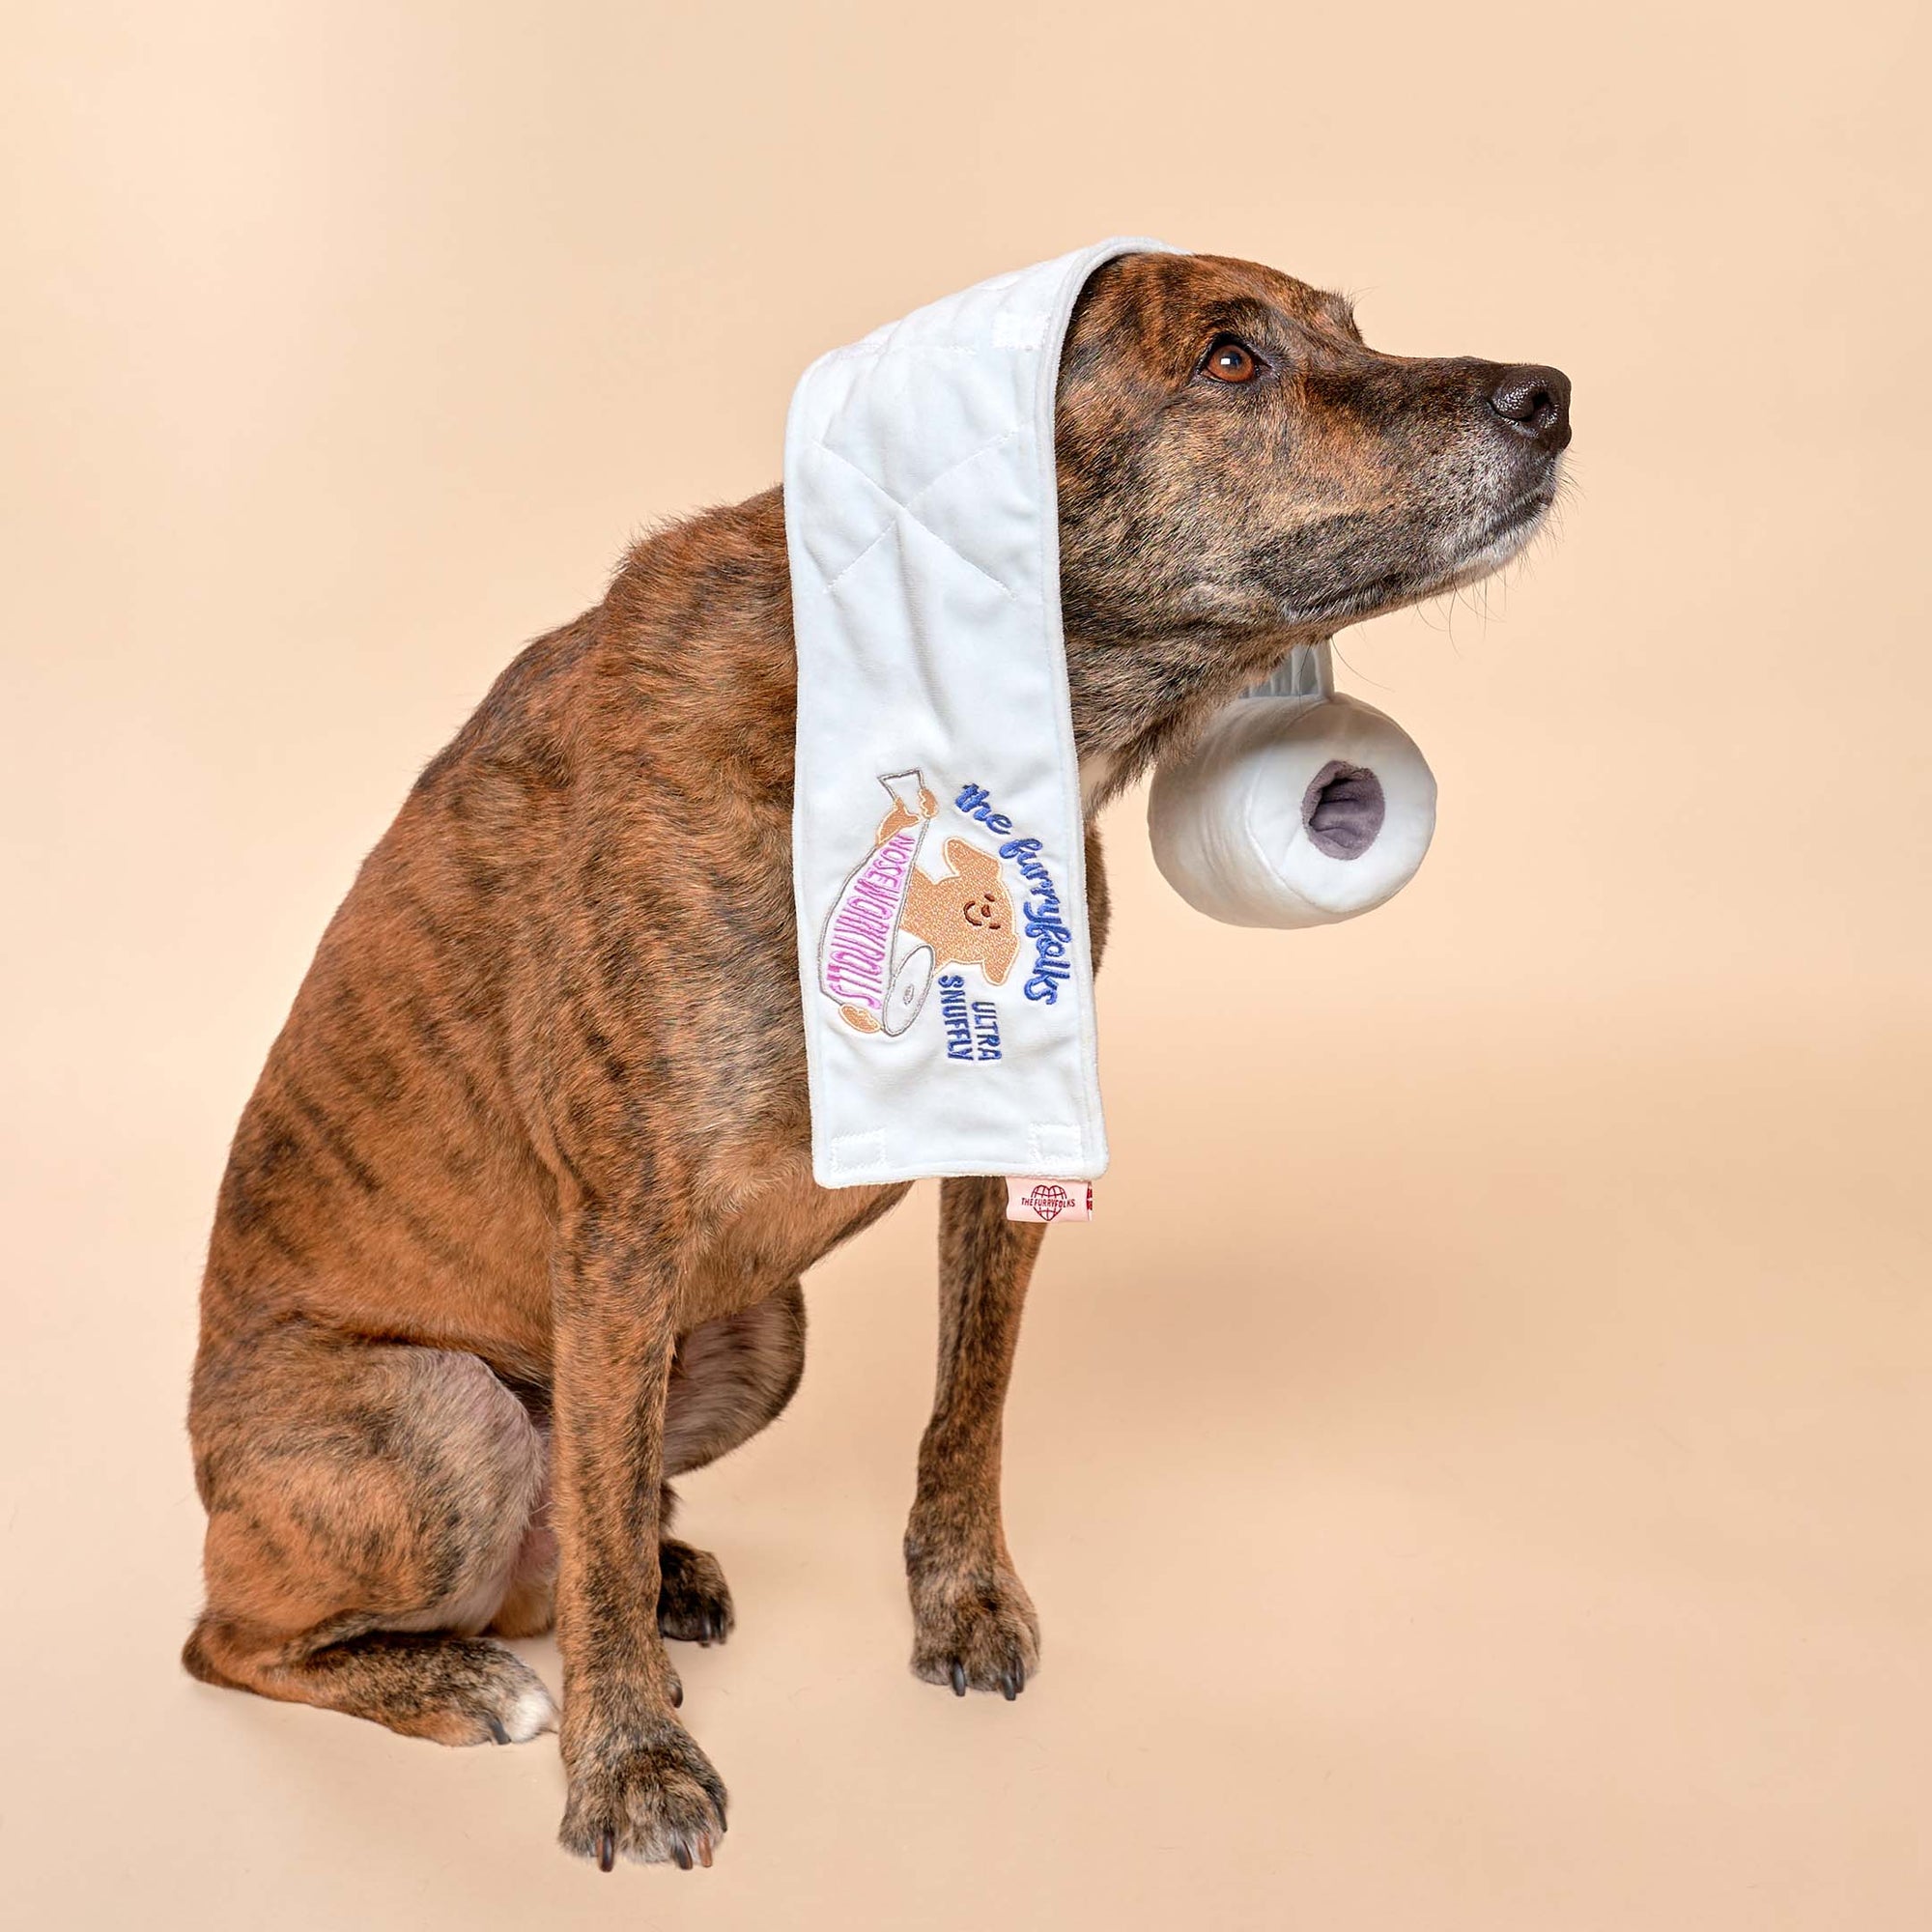 The image shows a brindle dog with a white snuffle mat draped over its neck, featuring "The Furryfolks" branding. The dog is looking to the side, giving the impression of being mid-movement or possibly distracted by something off-camera. The toy's rolled-up section suggests its use for hiding treats for the dog to find. The beige background emphasizes the dog and the toy, highlighting their interaction.